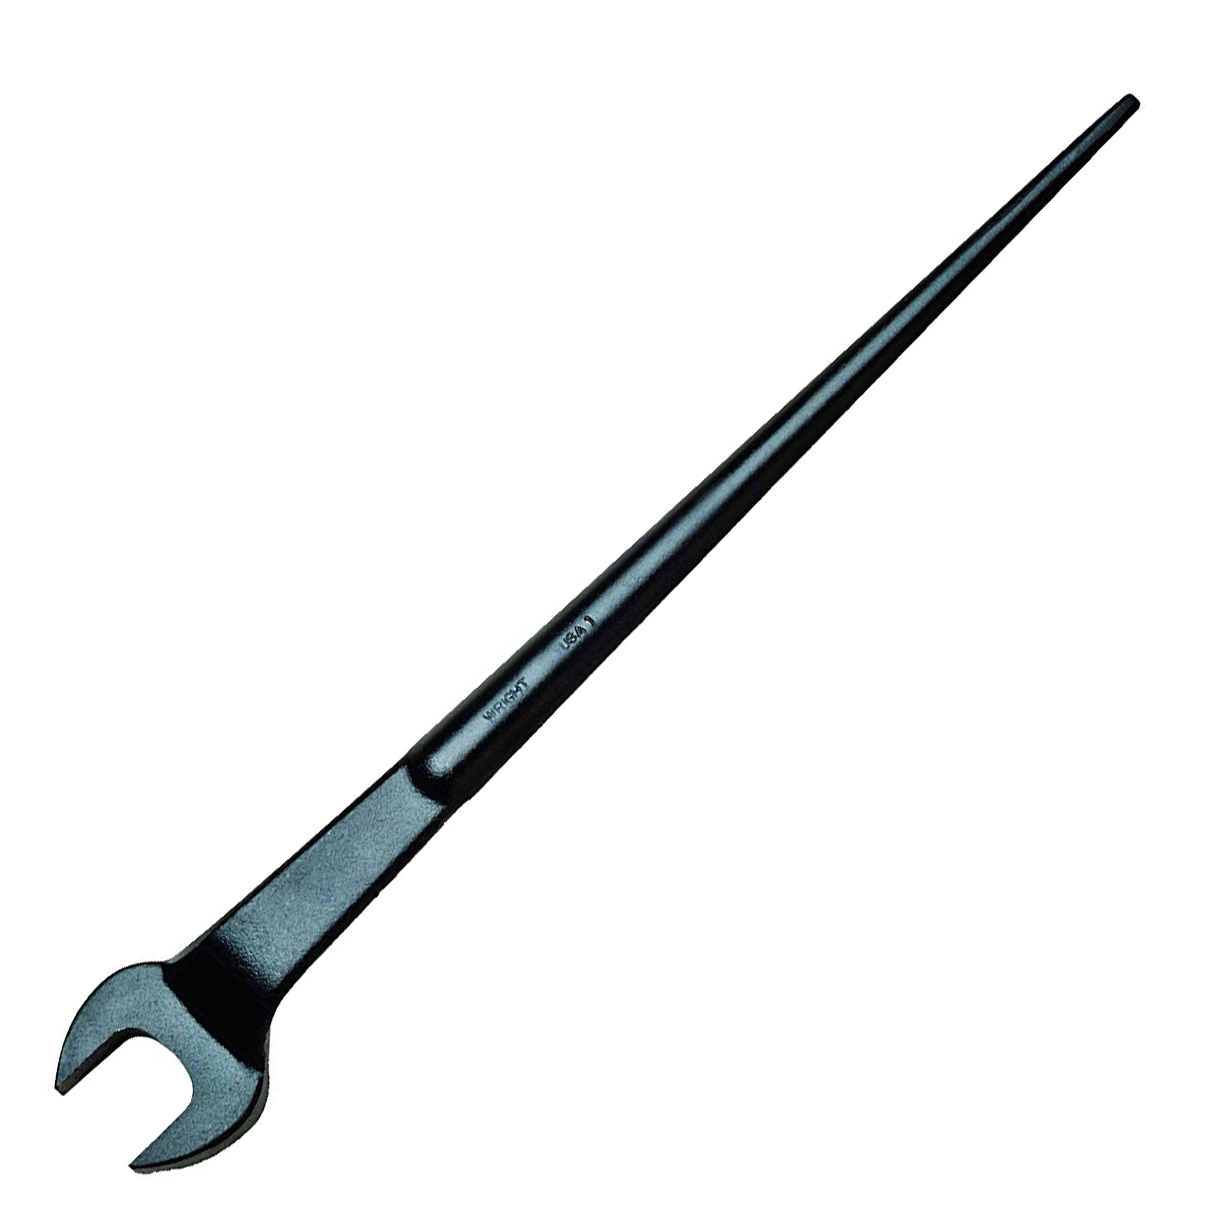 Wright 15/16" Structural Wrench Offset Head Black #1730 (1730WR)